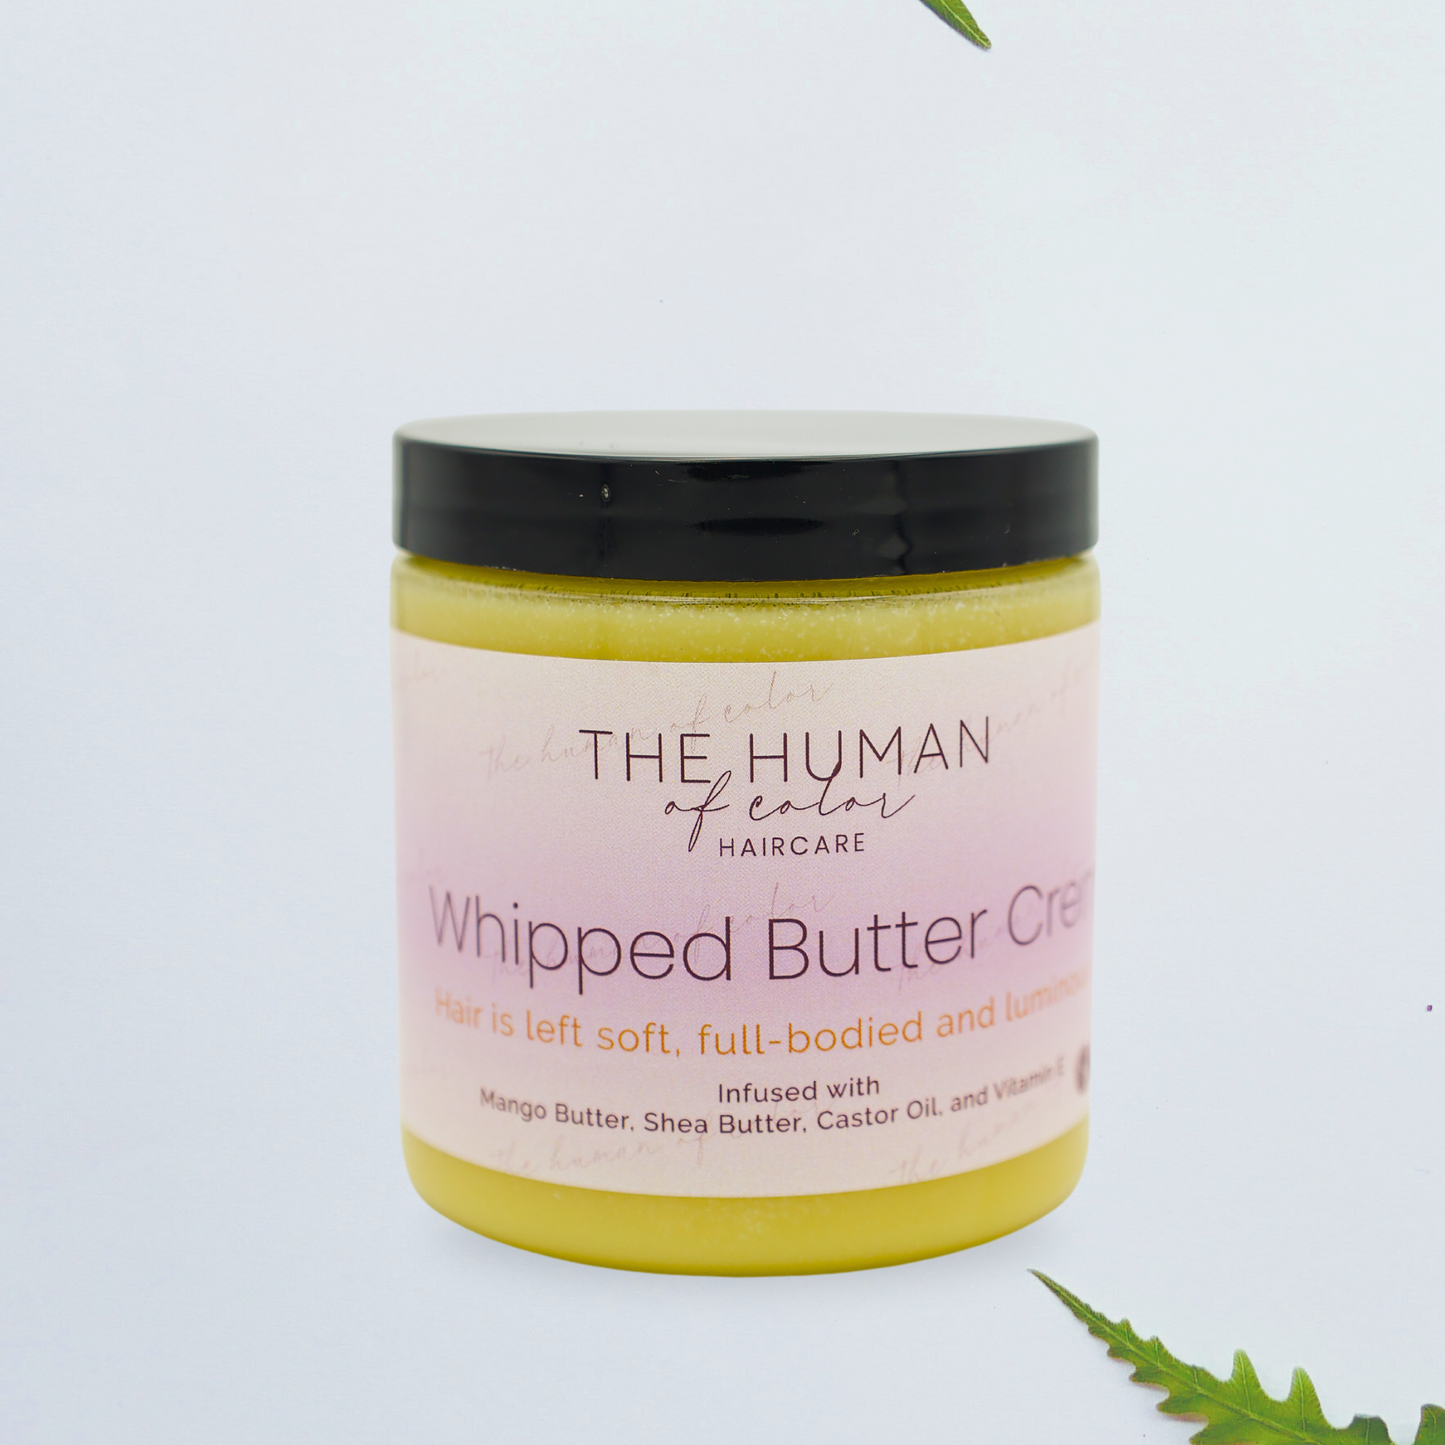 Wholesale: Whipped Butter Creme